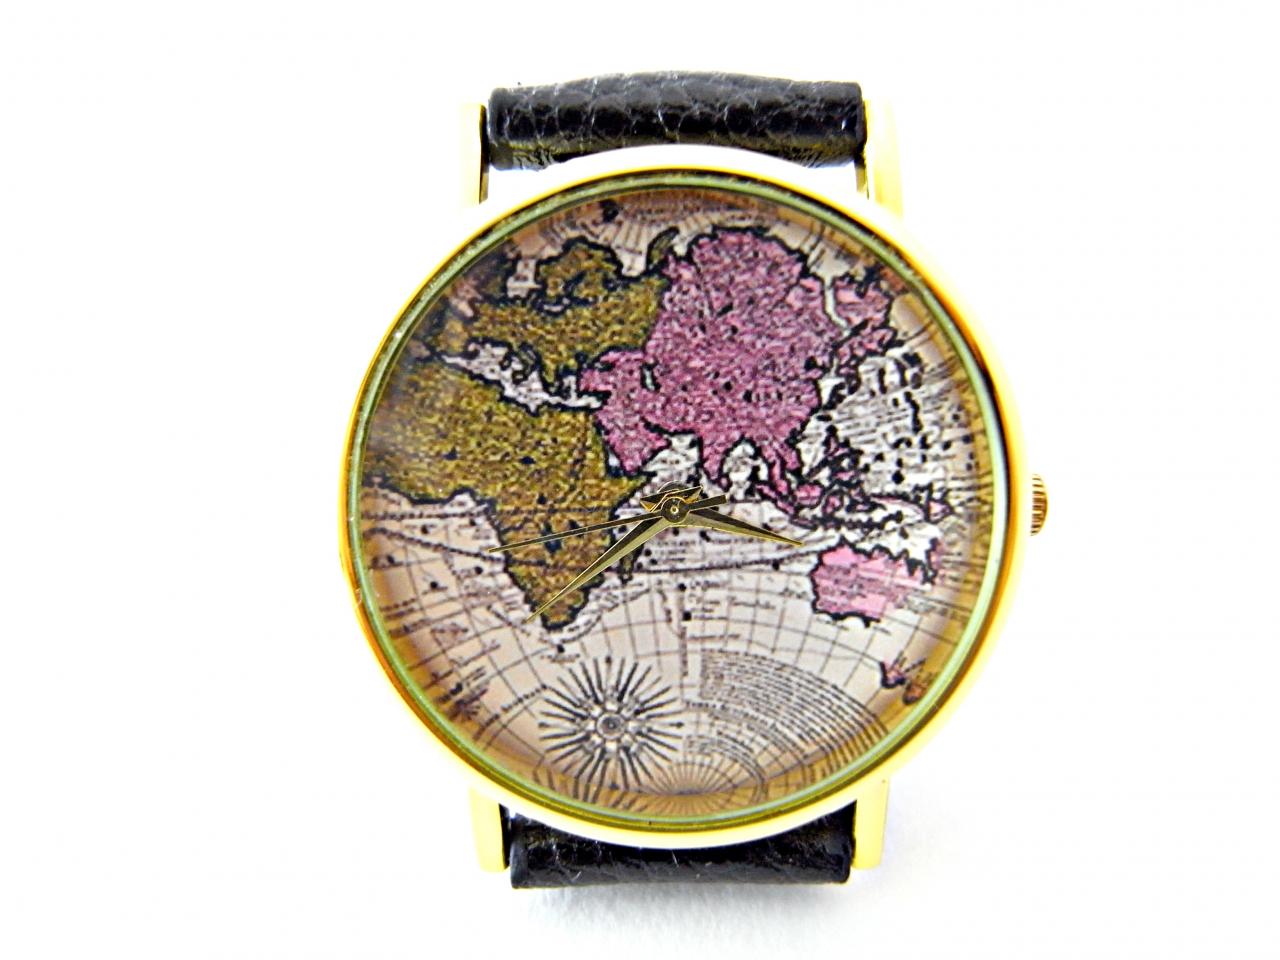 World Map Leather Wrist Watches, Woman Man Lady Unisex Watch, Genuine Leather Handmade Unique Watch #29